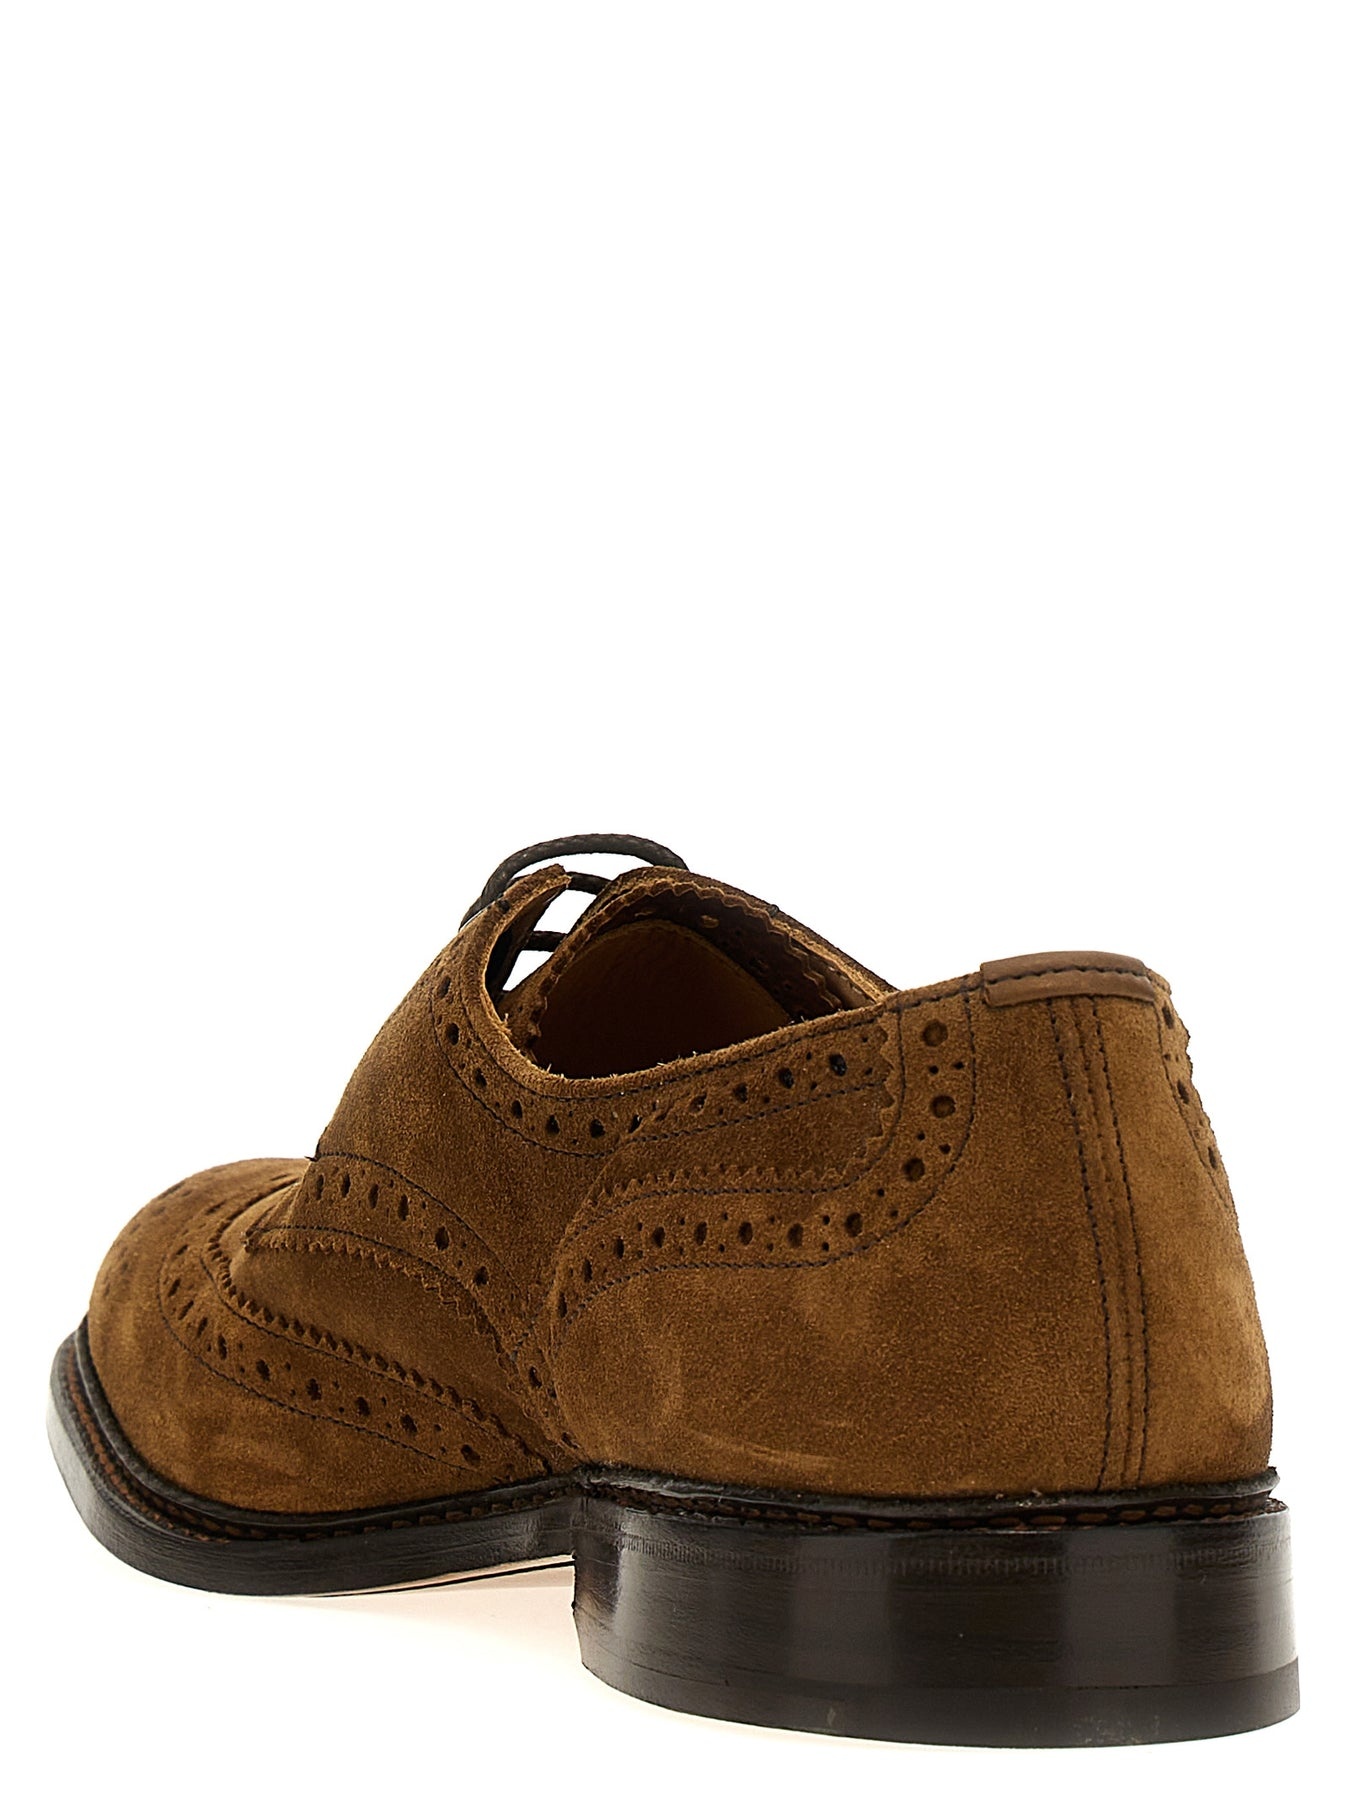 Bourton Lace Up Shoes Brown - 3